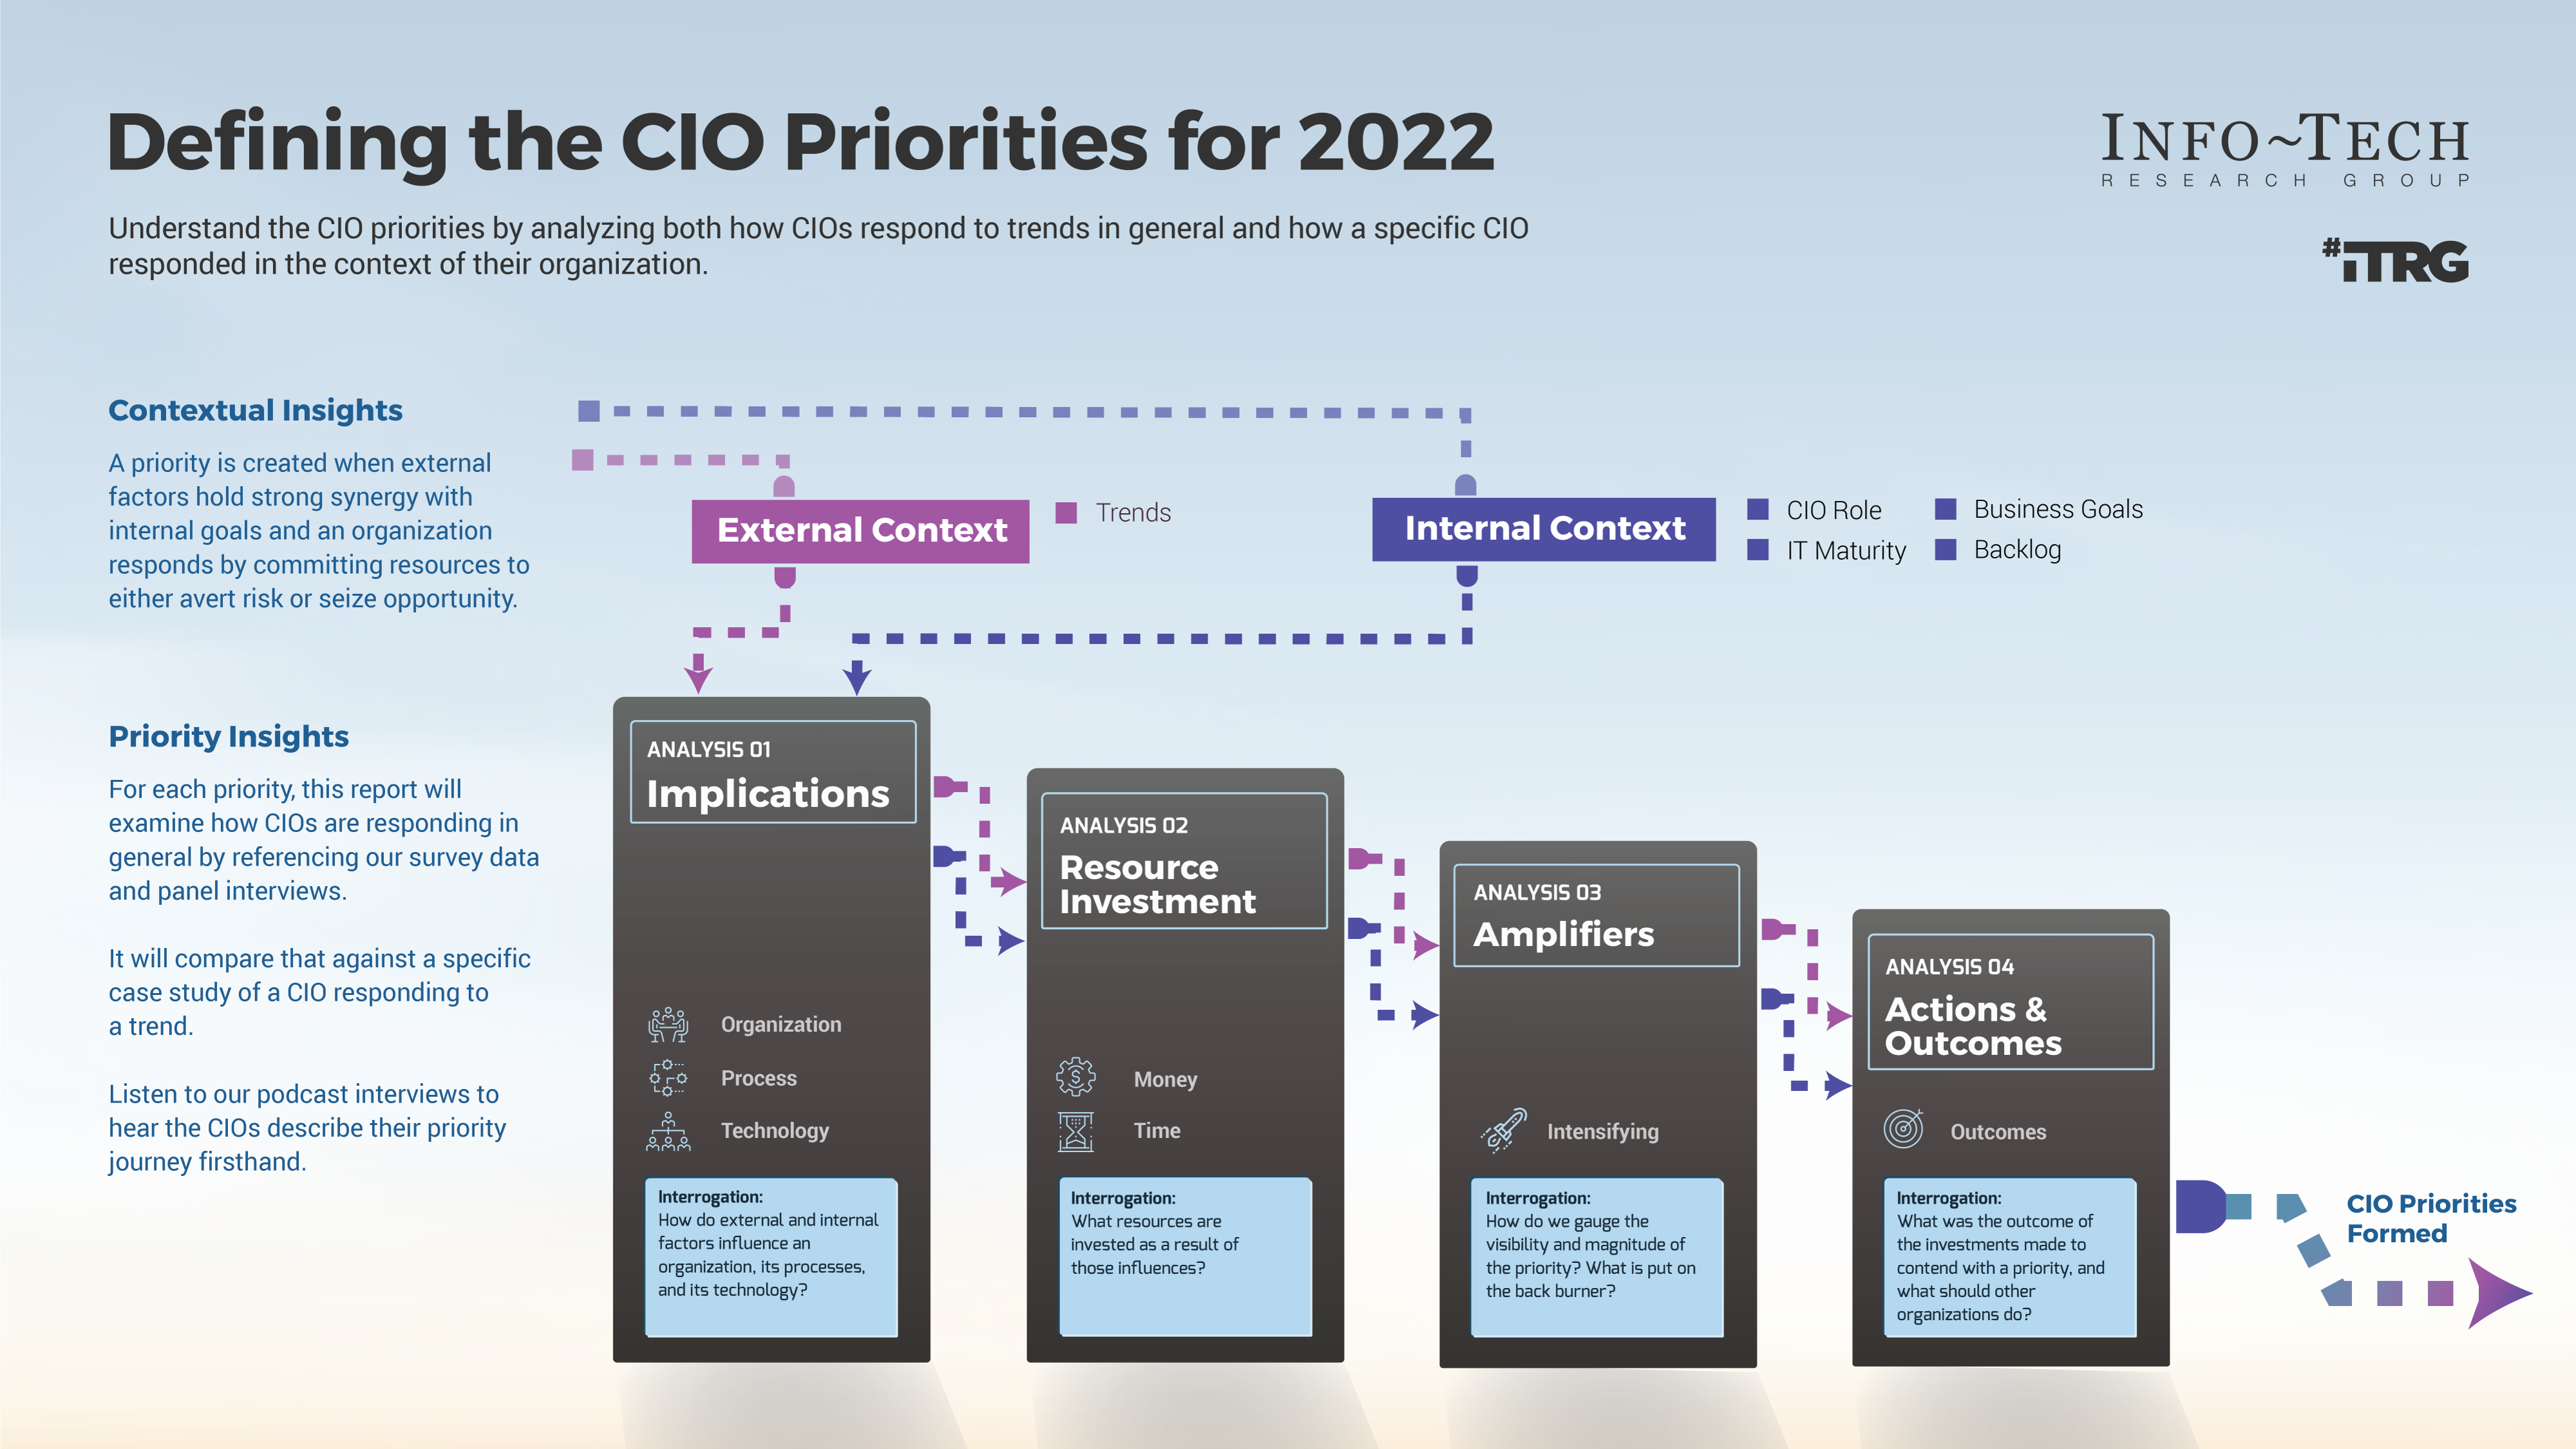 Image called 'Defining the CIO Priorities for 2022'. Image shows 4 columns, Implications, Resource Investment, Amplifiers, and Actions and Outcomes, with 2 dotted lines, labeled External Context and Internal Context, running through all 4 columns and leading to bottom-right label called CIO Priorities Formed